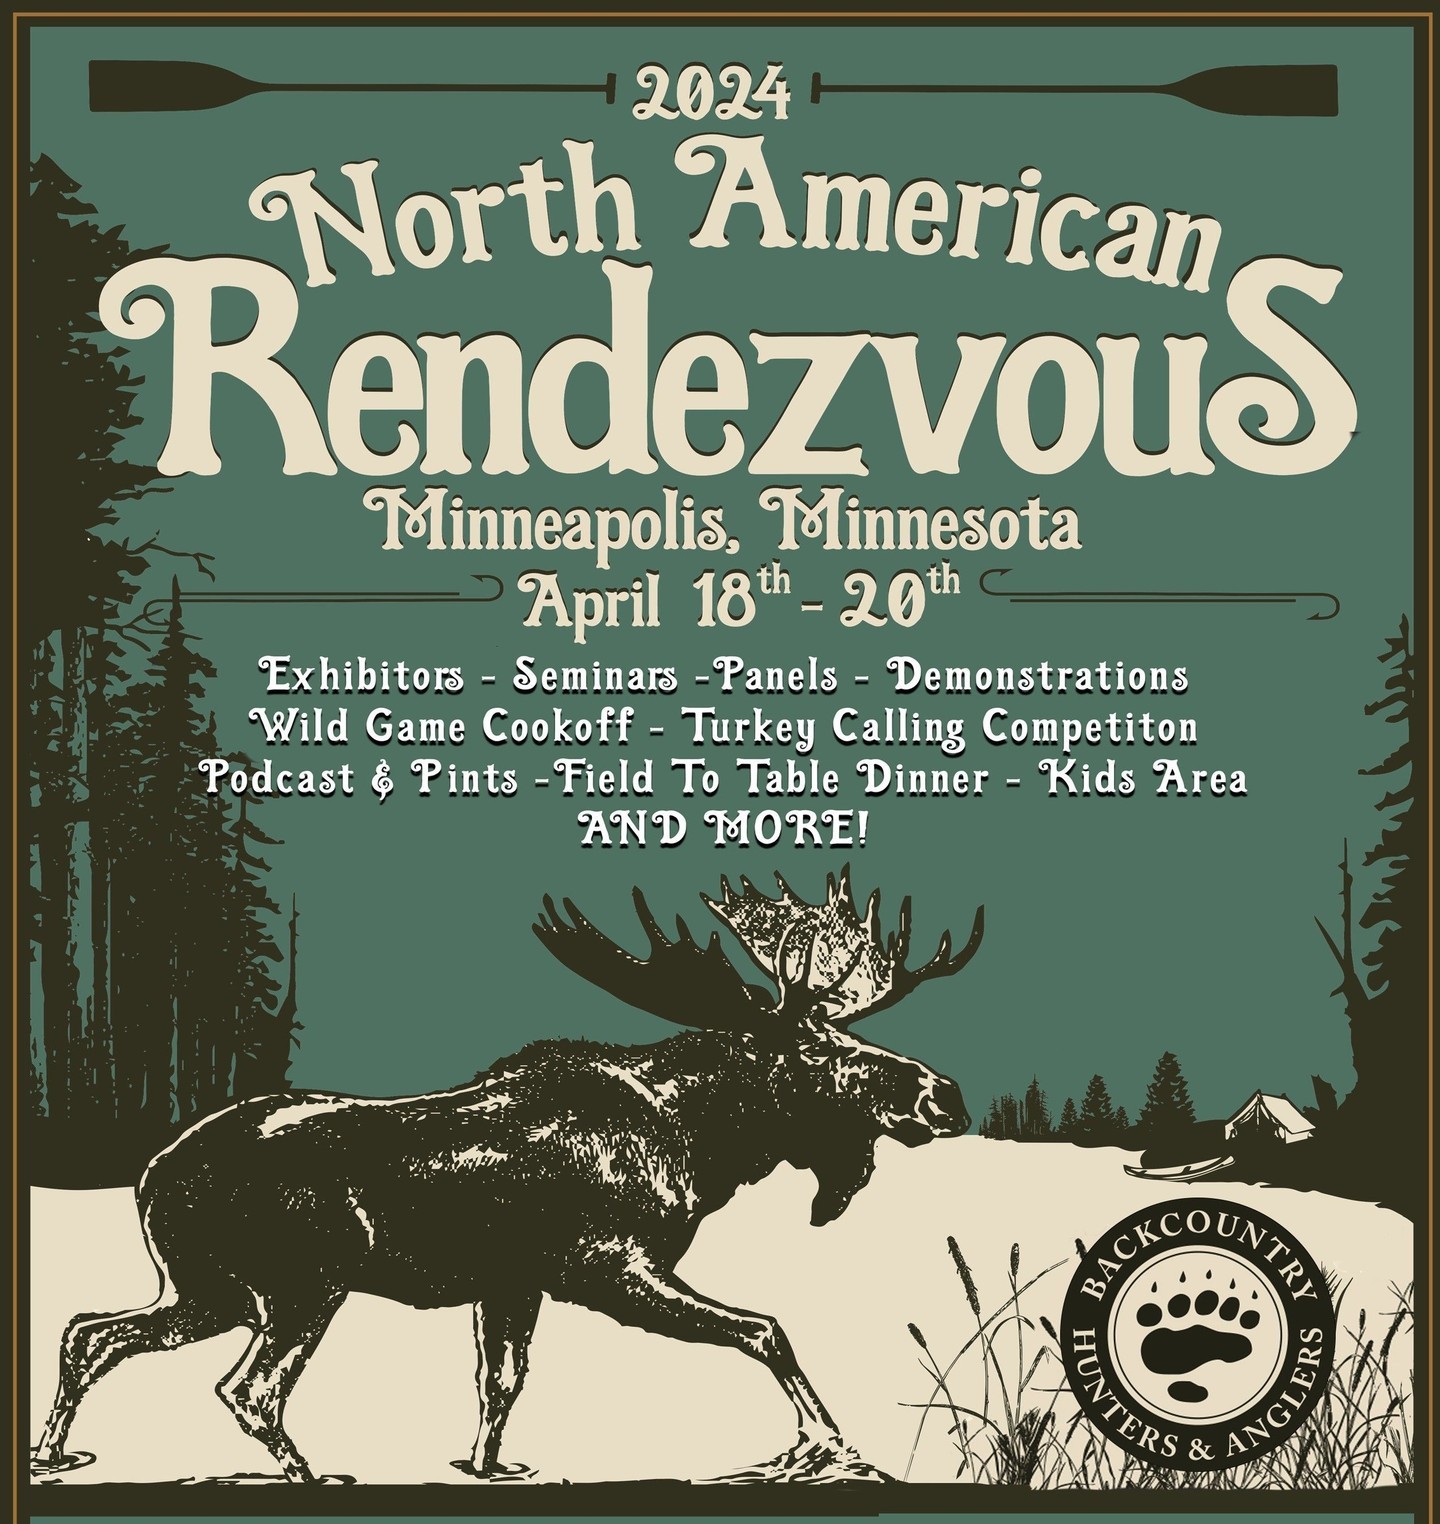 The bugle of an elk, the rustle of pheasant wings, and access to public lands. @backcountryhunters 2024 is coming to Minneapolis on April 18th-20th. 🫎⁠⁠If you hear sounds of the outdoors in downtown Minneapolis next week, there’s a good reason for it. For the first time in its history, Upstream Partner Backcountry Hunters & Anglers will be holding its annual Rendezvous event in Minnesota. The expansive gathering of hunters, anglers and outdoorspeople will happen April 18-20 at the Minneapolis Convention Center and other sites around the Twin Cities. ⁠⁠This year’s Rendezvous is a great place to learn more about conservation and other topics important to sportsmen and sportswomen and will feature a lineup of interesting speakers, demonstrations and highlights of partner organizations.⁠⁠@backcountryhunters' mission is to ensure North America's outdoor heritage of hunting and fishing in a natural setting, through education and work on behalf of wild public lands, waters, and wildlife. They are active in all parts of Minnesota, and help conserve and ensure access to public lands for people who love and care for the outdoors.⁠⁠Aaron Hebeisen, BHA Director for Minnesota talked about the importance of the event being in Minnesota, “We are proud to bring the Rendezvous to Minnesota as we celebrate BHA’s 20th Anniversary and showcase the incredible public lands we have in the state. BHA members and Minnesotans value our outdoor spaces, and we practice grassroots stewardship to ensure these public lands are accessible for everyone, not just hunters and anglers, but anyone who goes out and enjoys our wild spaces!”⁠⁠ Tap the link in bio to learn more & buy your tickets.⁠ — from Instagram